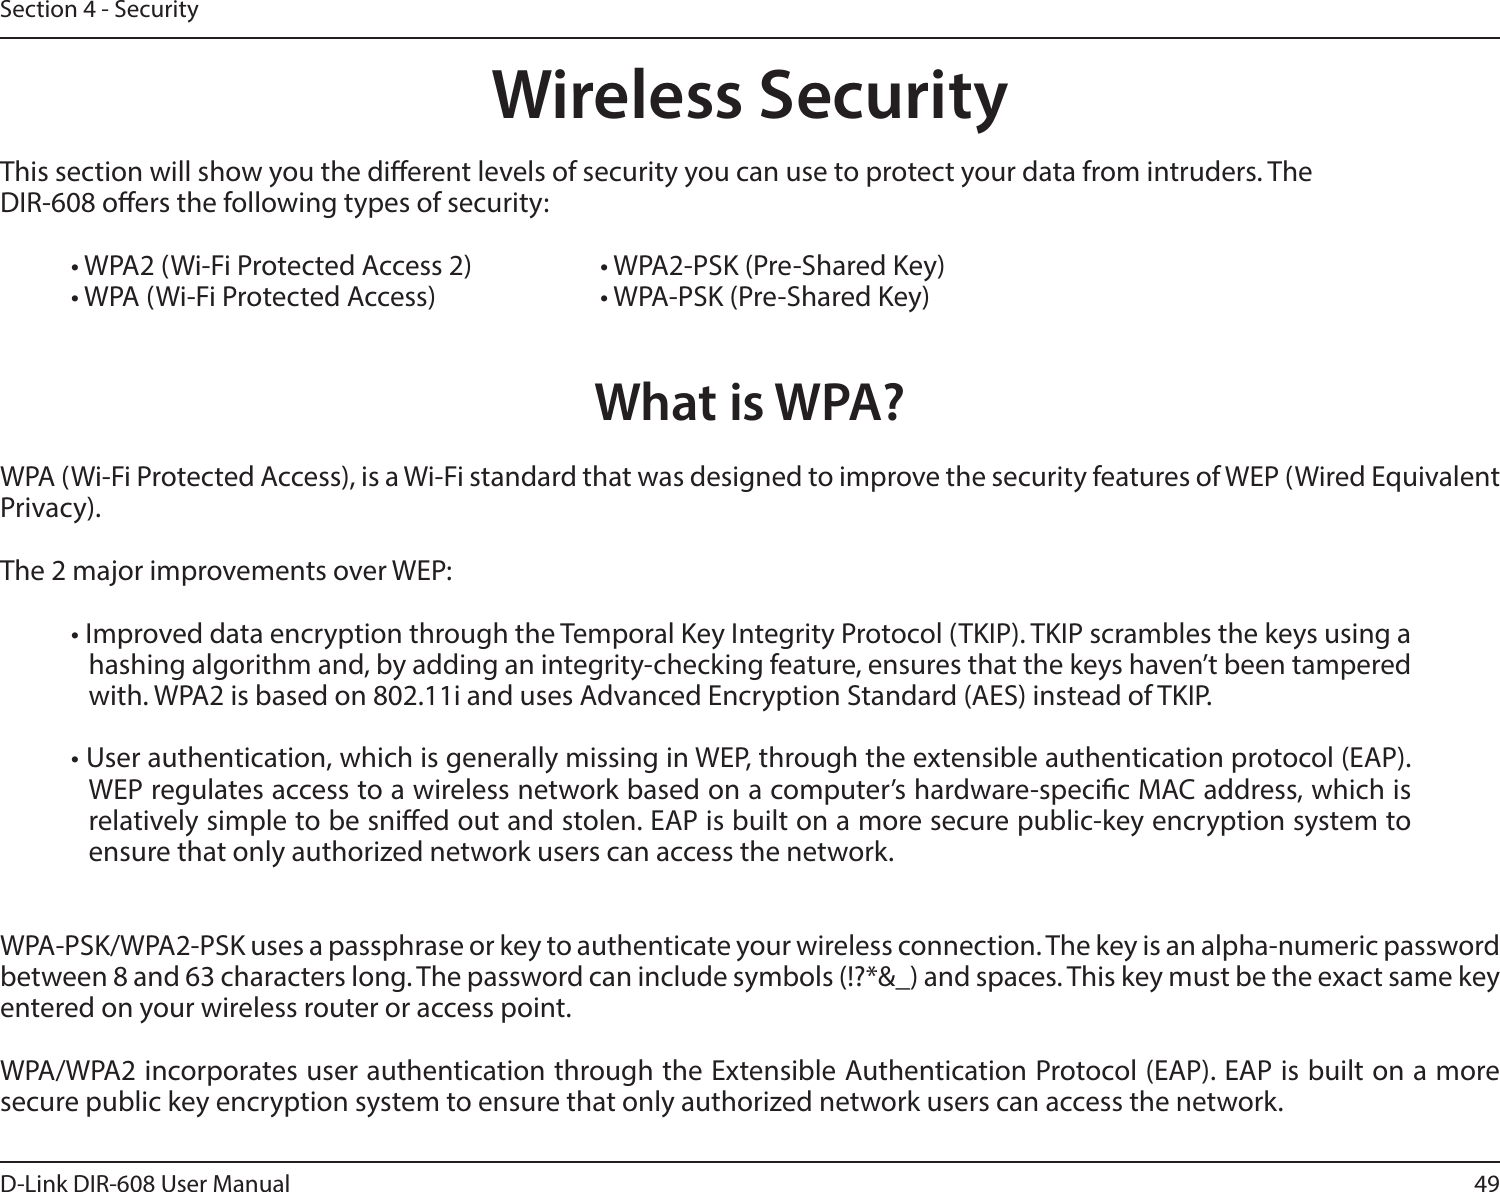 49D-Link DIR-608 User ManualSection 4 - SecurityWireless SecurityThis section will show you the dierent levels of security you can use to protect your data from intruders. The DIR-608 oers the following types of security:• WPA2 (Wi-Fi Protected Access 2)     • WPA2-PSK (Pre-Shared Key)• WPA (Wi-Fi Protected Access)      • WPA-PSK (Pre-Shared Key)What is WPA?WPA (Wi-Fi Protected Access), is a Wi-Fi standard that was designed to improve the security features of WEP (Wired Equivalent Privacy).  The 2 major improvements over WEP: • Improved data encryption through the Temporal Key Integrity Protocol (TKIP). TKIP scrambles the keys using a hashing algorithm and, by adding an integrity-checking feature, ensures that the keys haven’t been tampered with. WPA2 is based on 802.11i and uses Advanced Encryption Standard (AES) instead of TKIP.• User authentication, which is generally missing in WEP, through the extensible authentication protocol (EAP). WEP regulates access to a wireless network based on a computer’s hardware-specic MAC address, which is relatively simple to be snied out and stolen. EAP is built on a more secure public-key encryption system to ensure that only authorized network users can access the network.WPA-PSK/WPA2-PSK uses a passphrase or key to authenticate your wireless connection. The key is an alpha-numeric password between 8 and 63 characters long. The password can include symbols (!?*&amp;_) and spaces. This key must be the exact same key entered on your wireless router or access point.WPA/WPA2 incorporates user authentication through the Extensible Authentication Protocol (EAP). EAP is built on a more secure public key encryption system to ensure that only authorized network users can access the network.